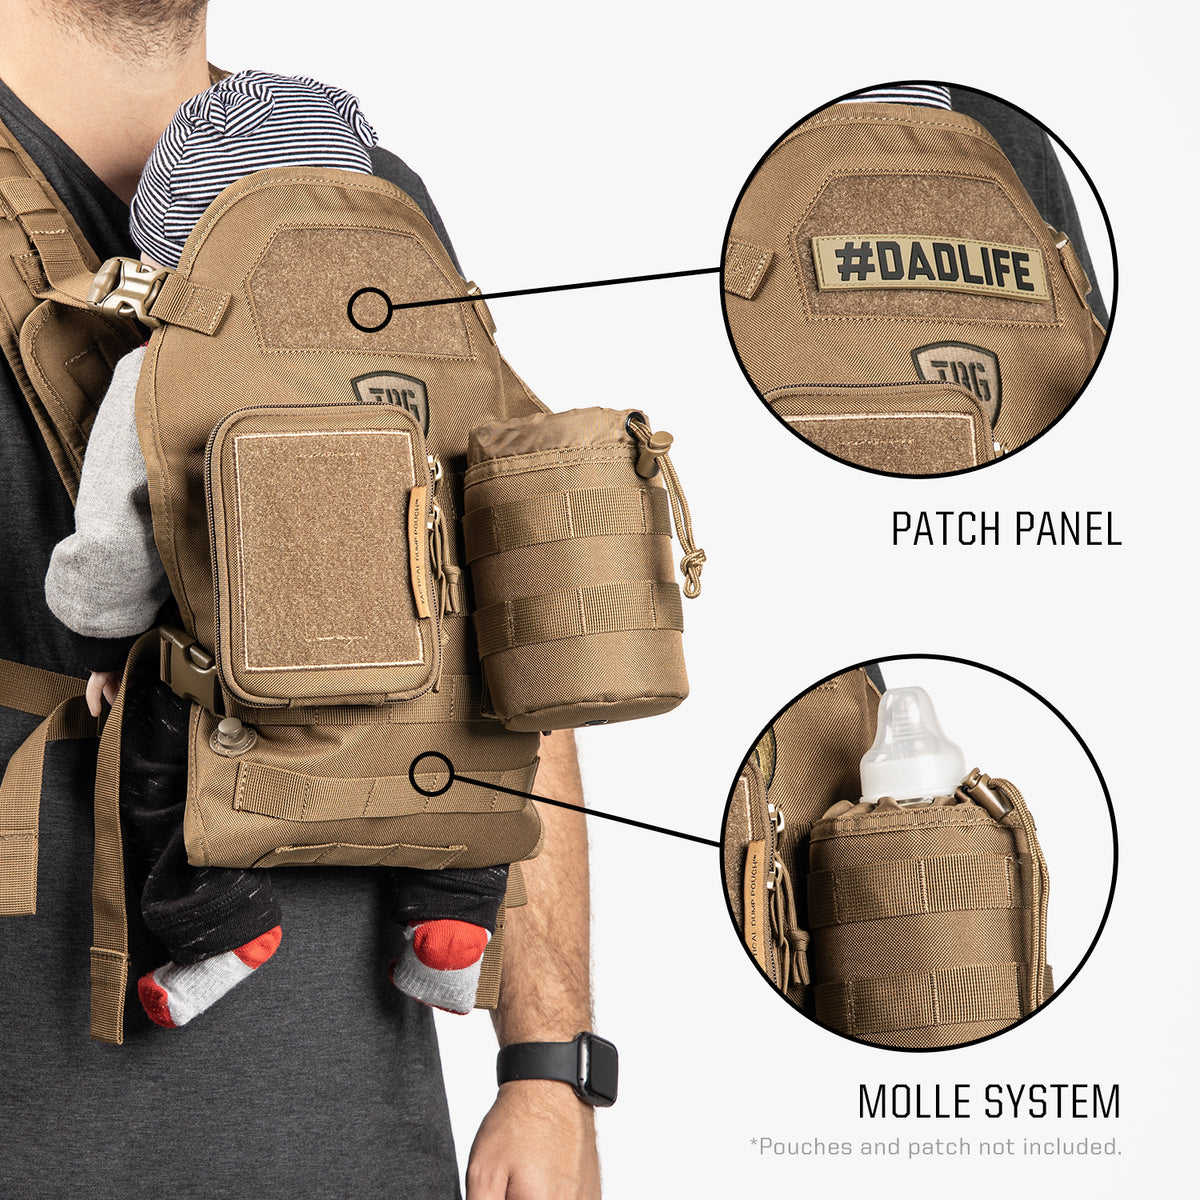 military baby carrier